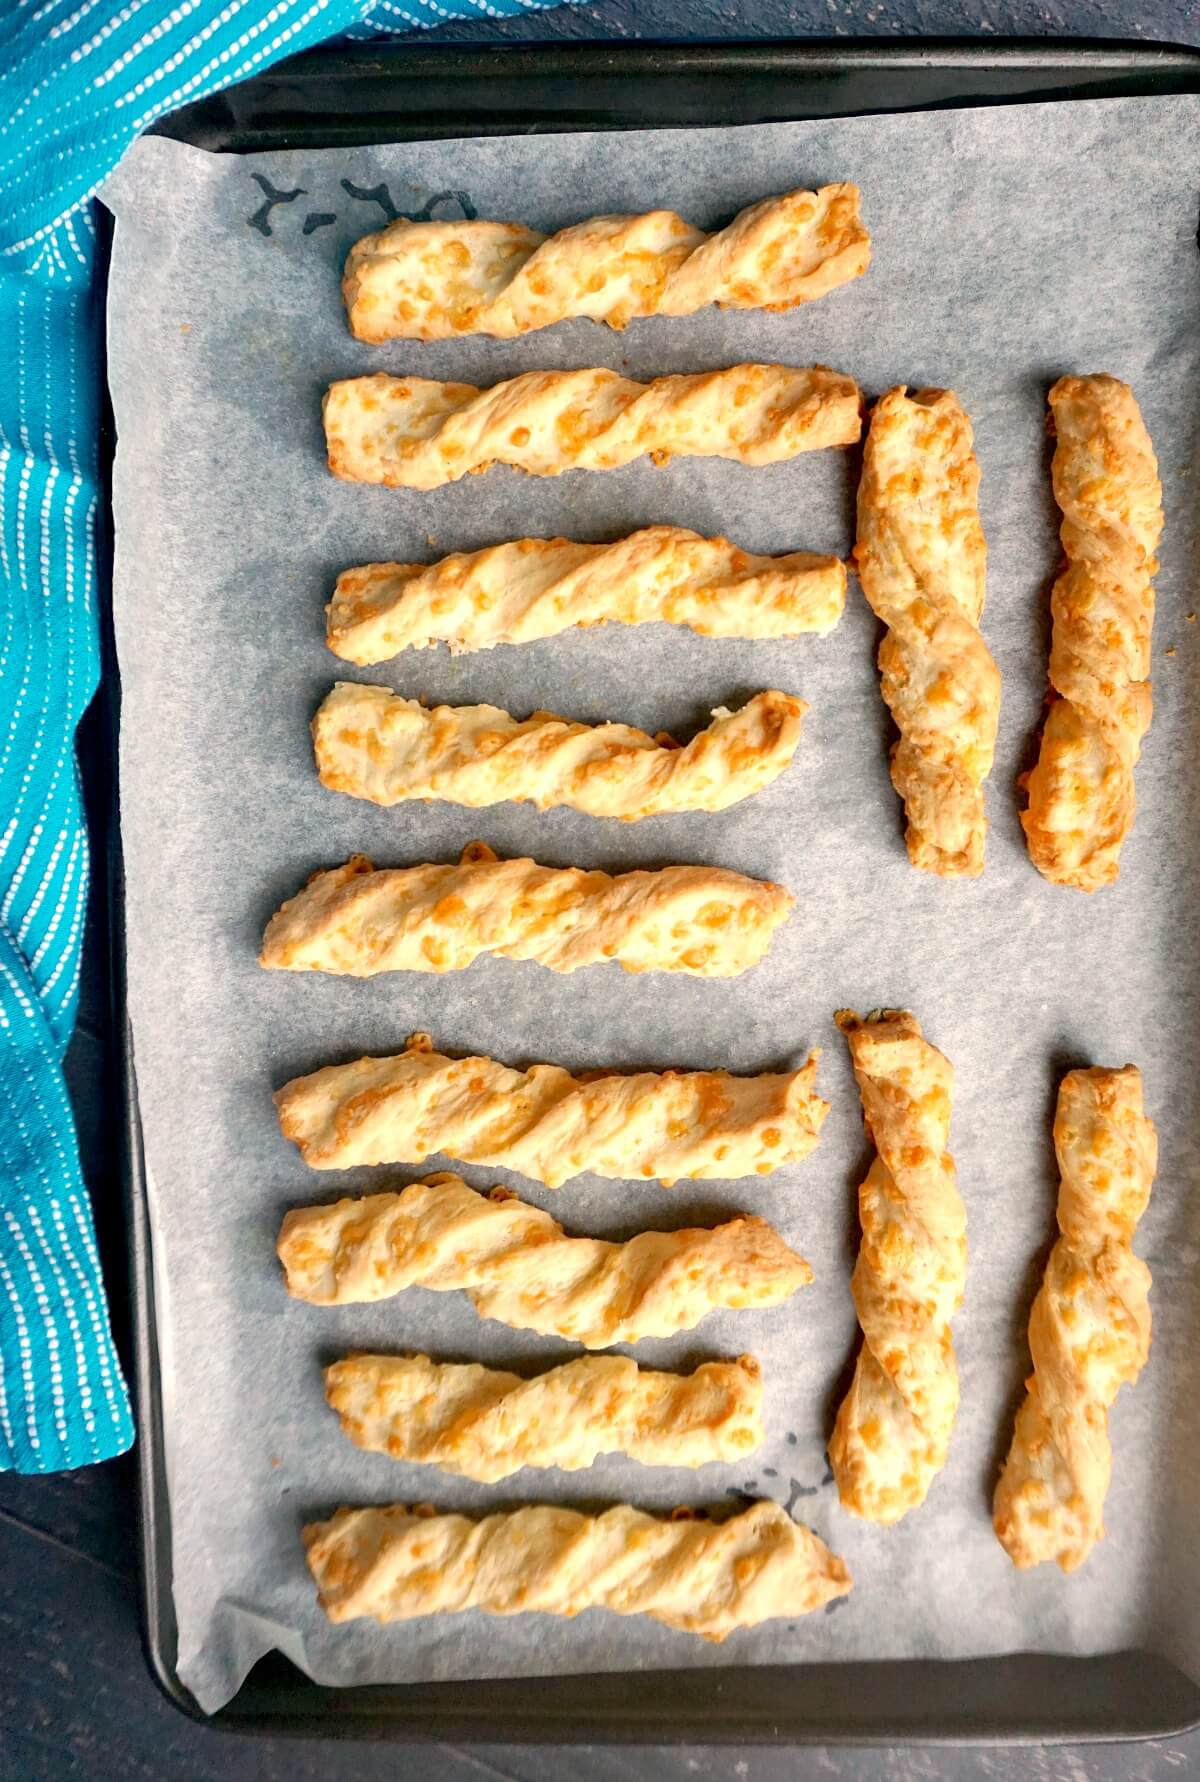 Overhead shoot of a baking tray with 13 cheese twists